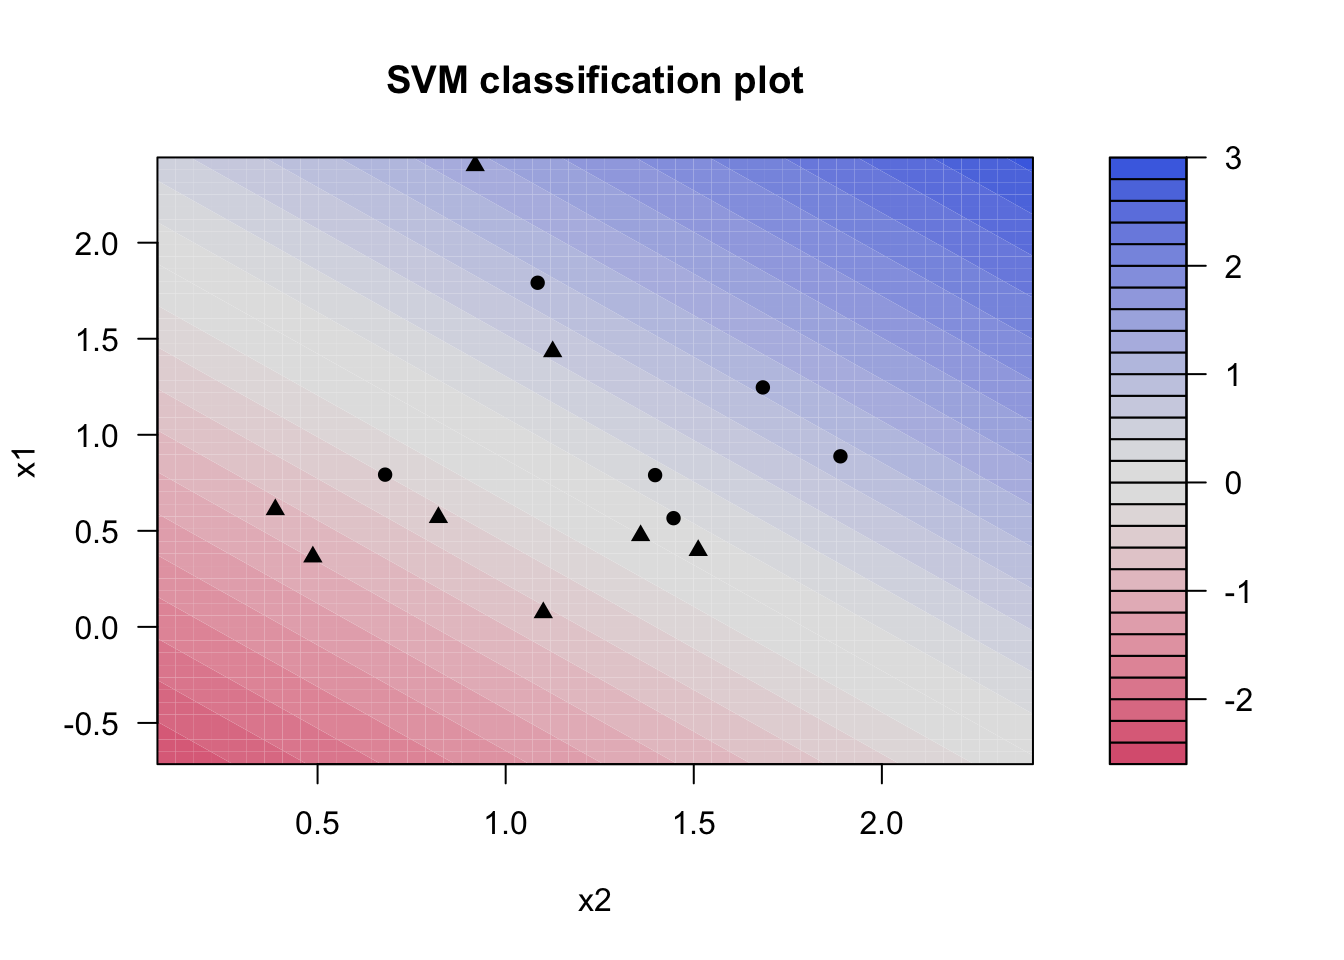 Scatter chart of sim_data with x2 on the x-axis and x1 on the y-axis. A gradient going from red through white to blue, is overlaid. Blue values occur when both x1 and x2 sum to more than 2 and red values when x1 and x2 sum to less than 2. The gradient does not appear to seperate the two classes which is represented by shapes.